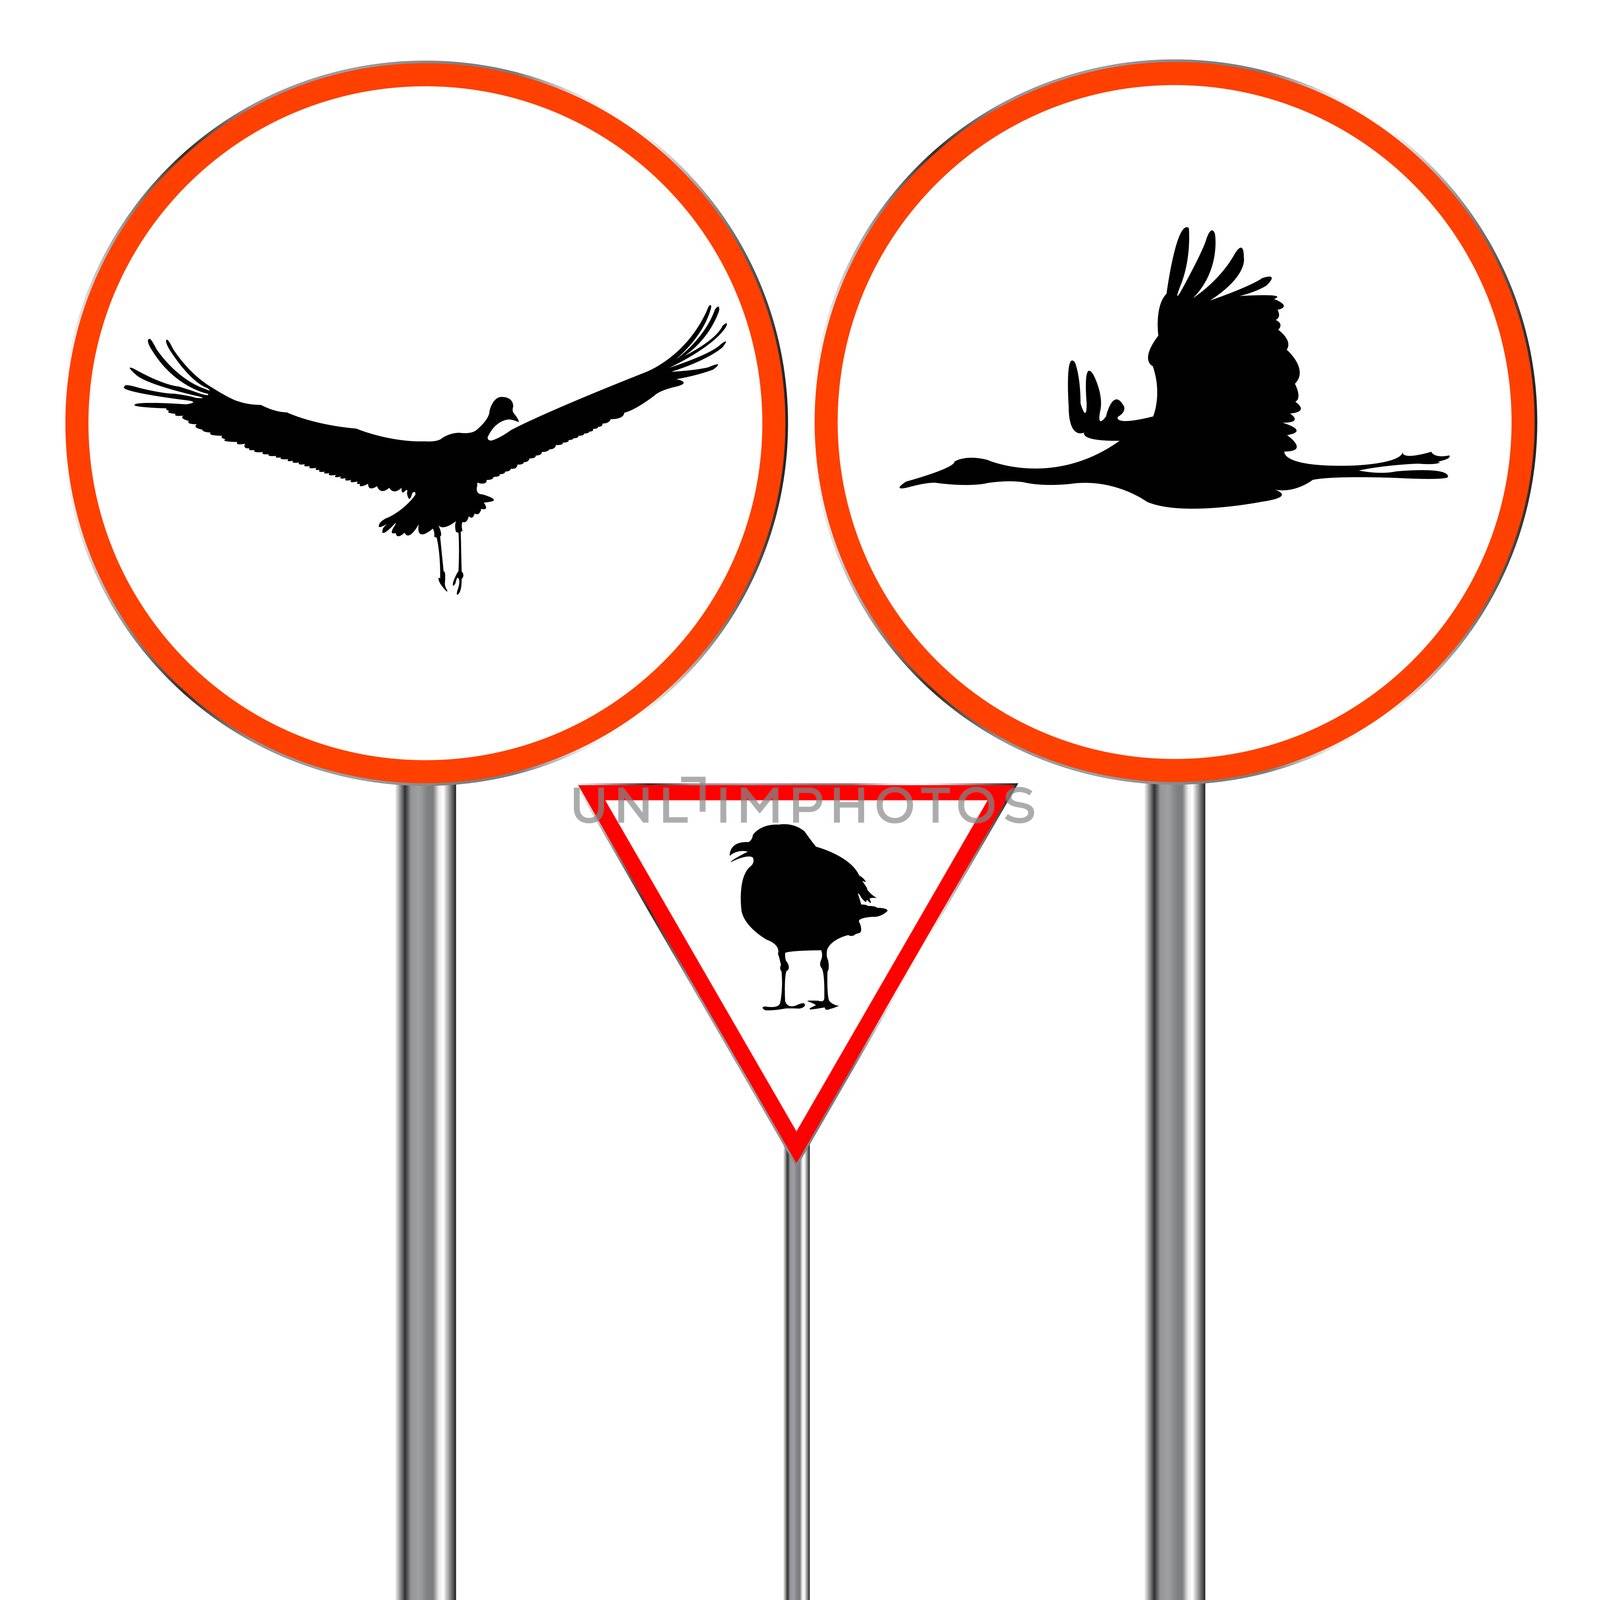 birds traffic signs isolated on white background, abstract art illustration